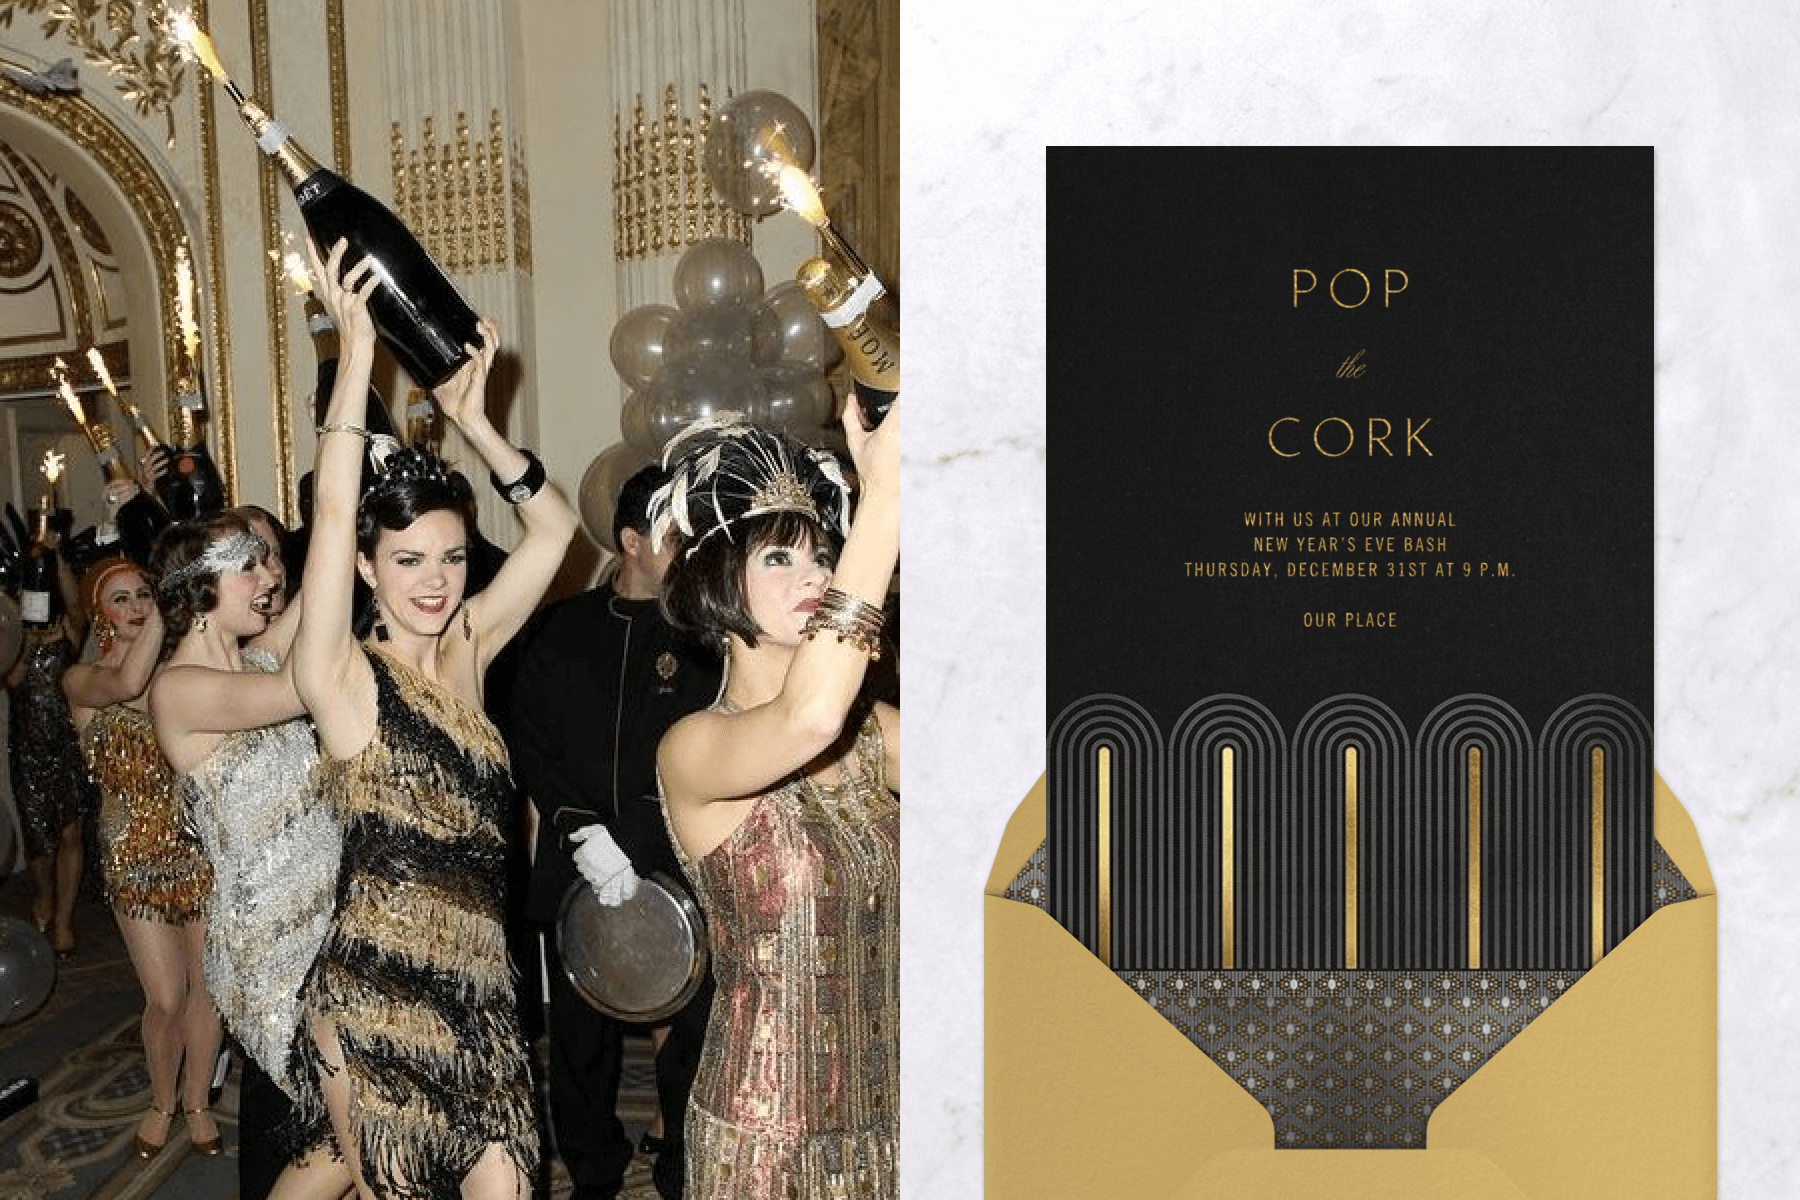 Women in Flapper dresses hold up large sparkling Champagne bottles in an ornate room; a black invitation with gold Art Deco arches on the bottom. 